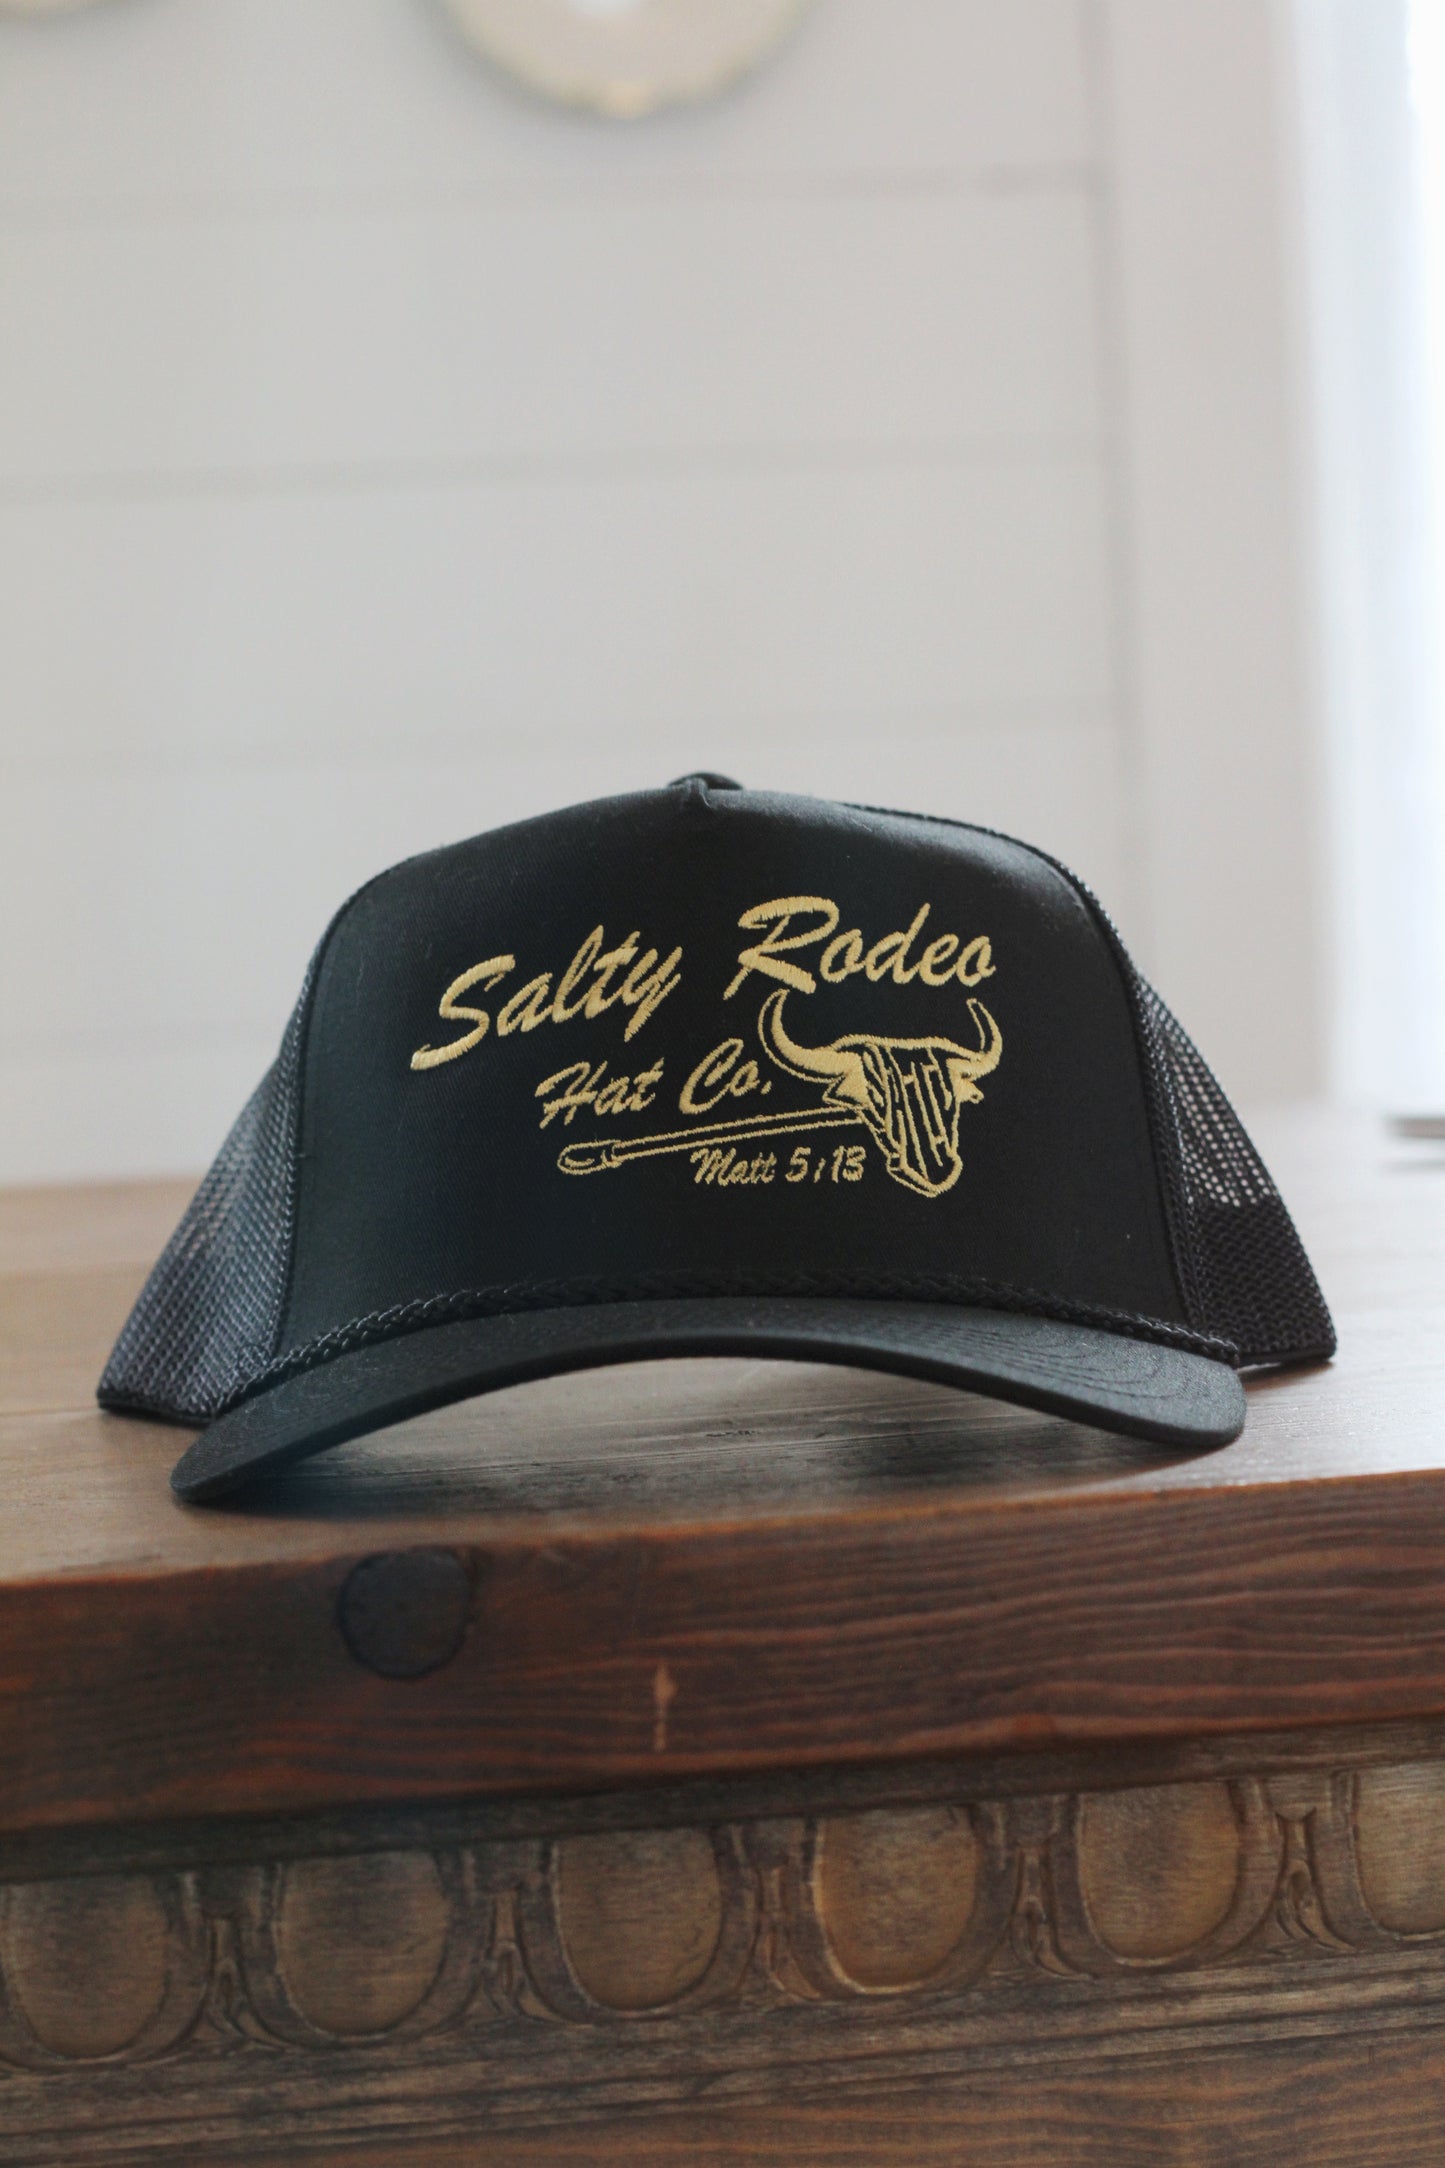 Salty Rodeo "The Brand" Hat